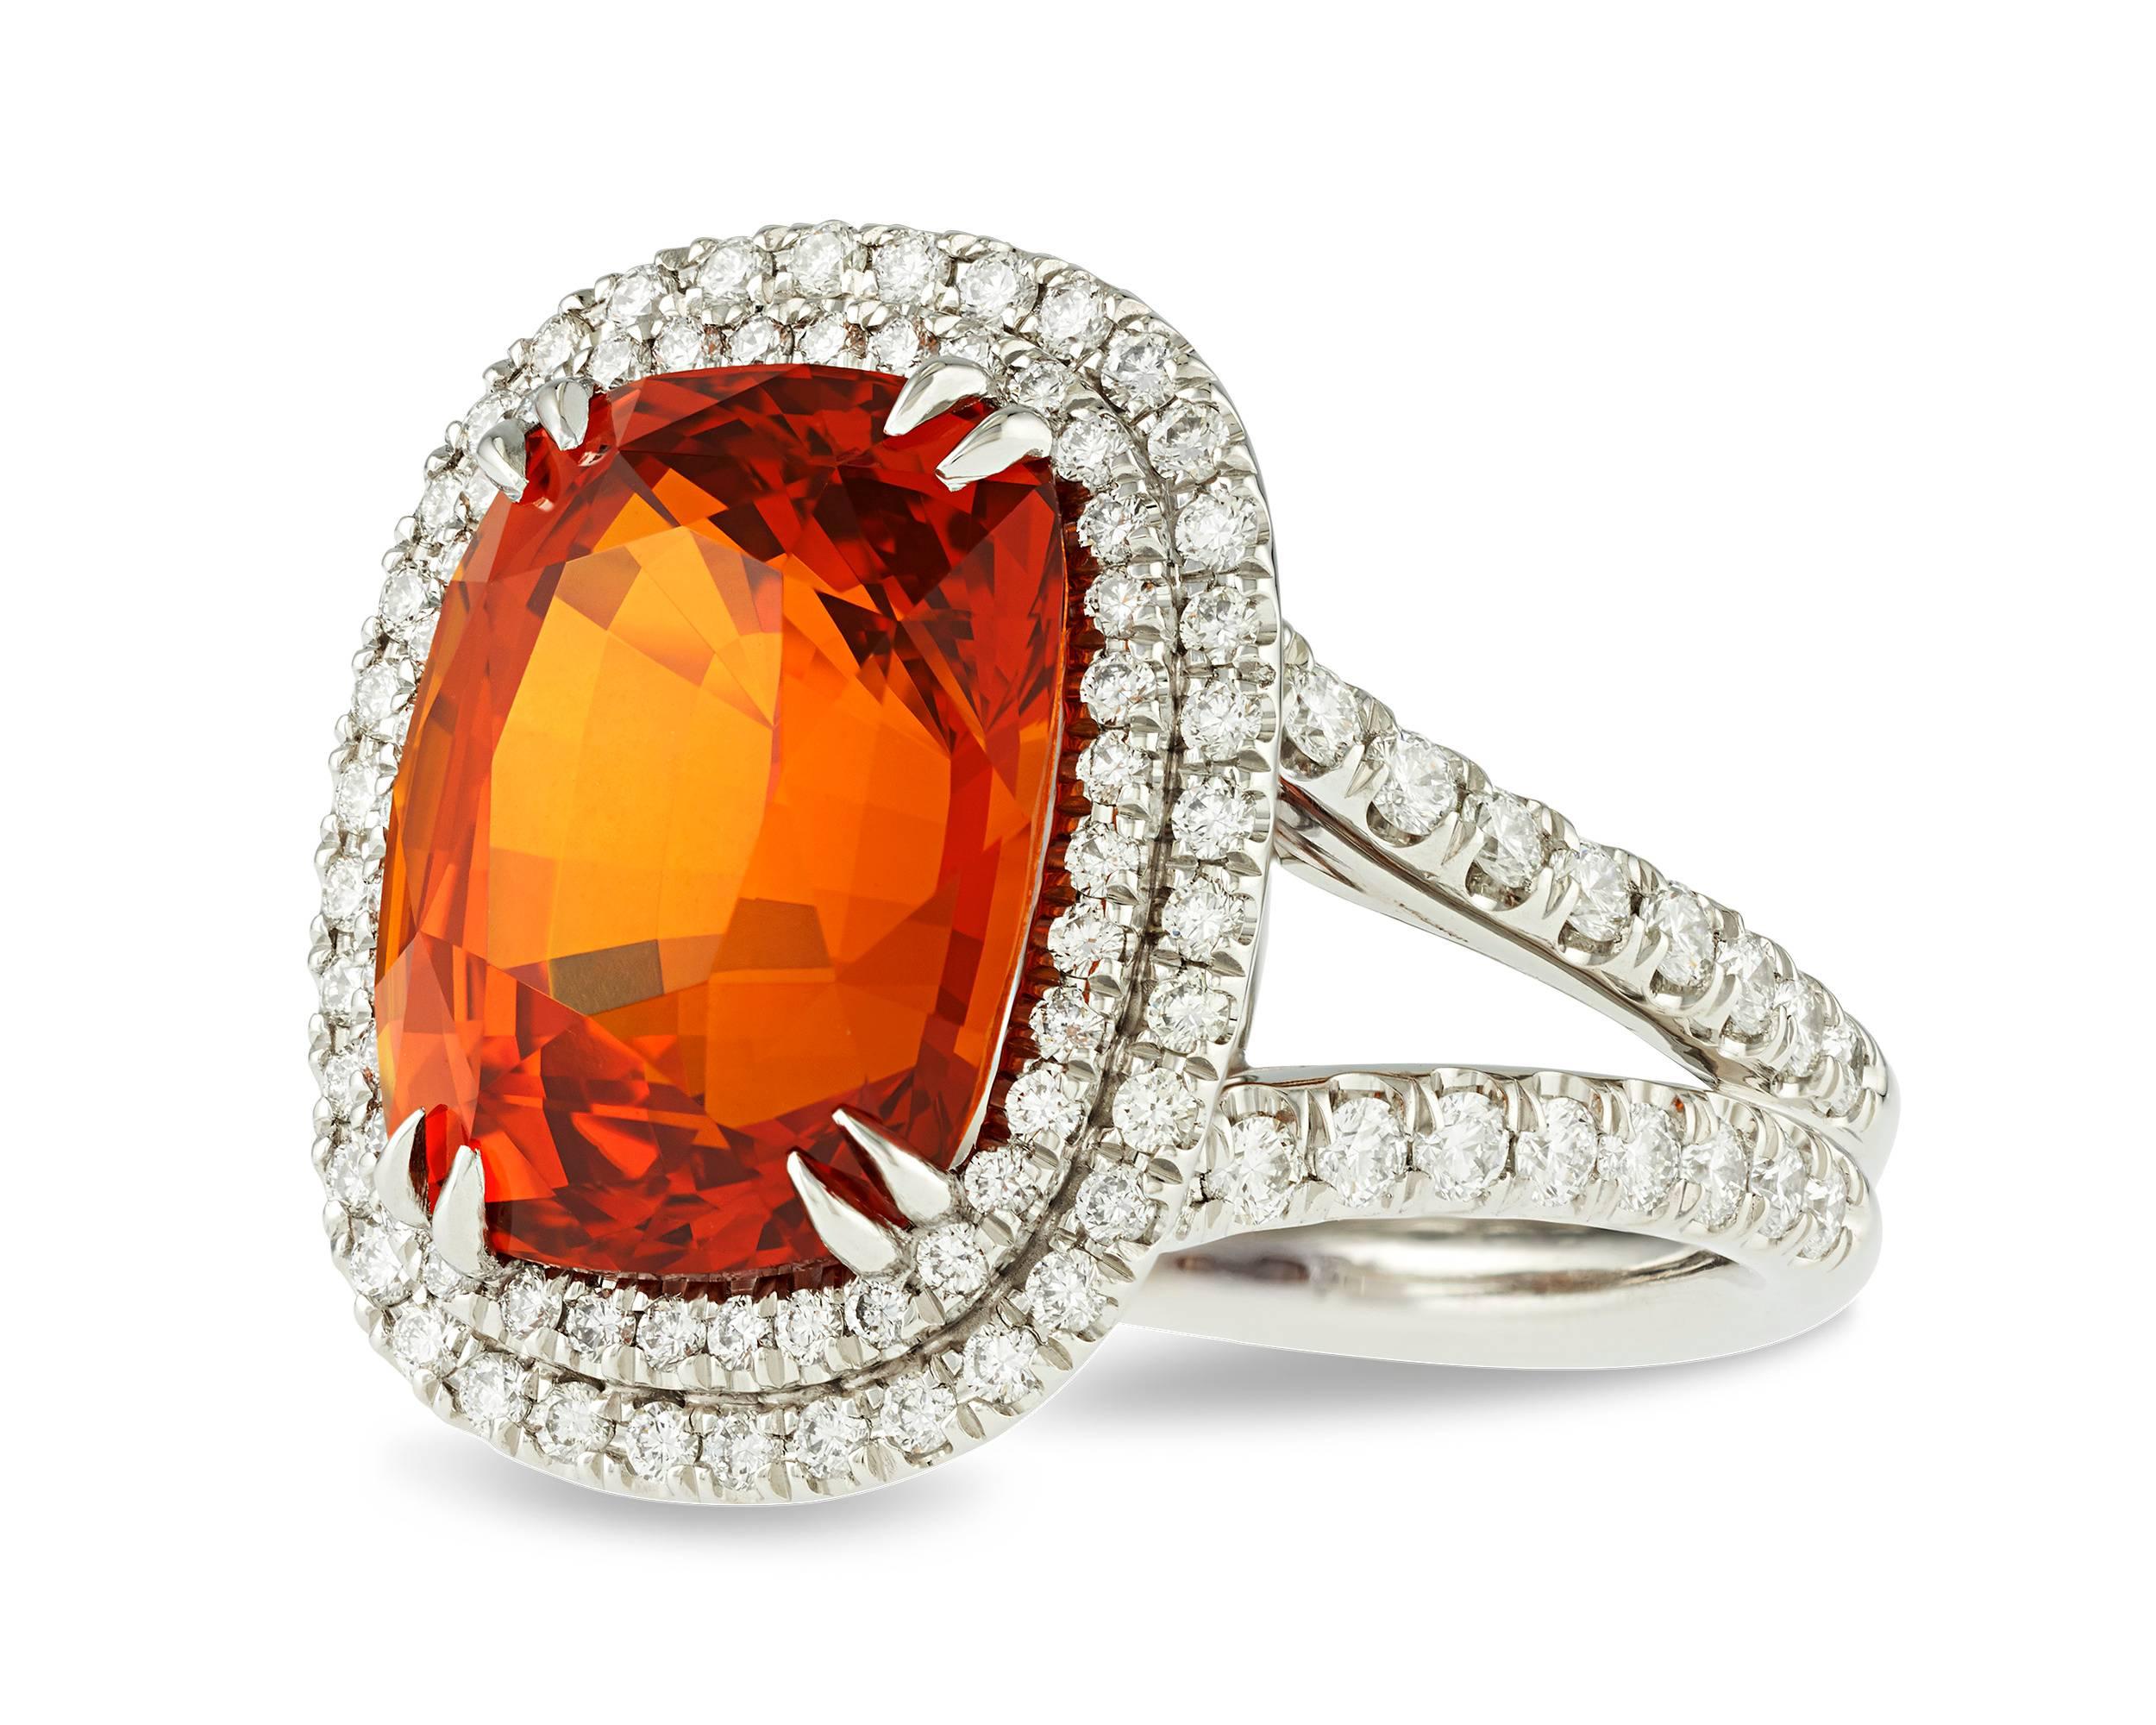 The eye-catching 10.11-carat orange sapphire in this ring possesses an intense color seldom seen in these jewels. While sapphires are most commonly found in shades of yellow or blue, this jewel's rich orange is reminiscent of a mandarin garnet or